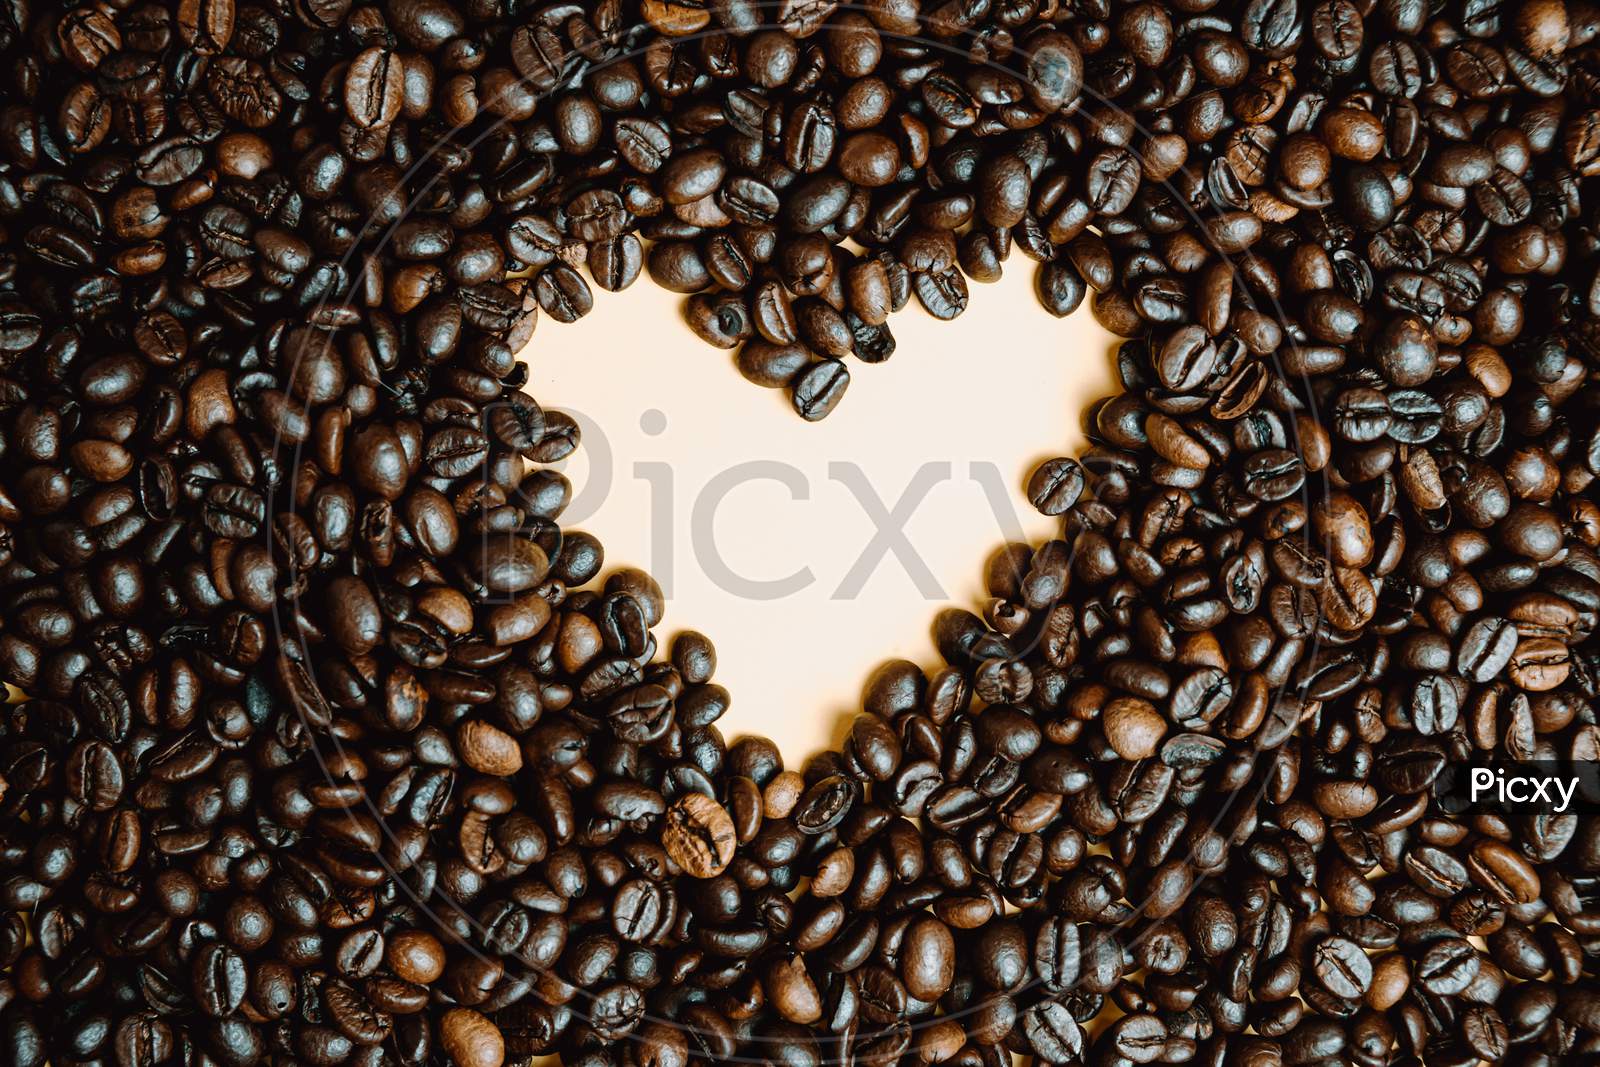 Yellow Heart Draw Inside A Lot Of Coffee Grains